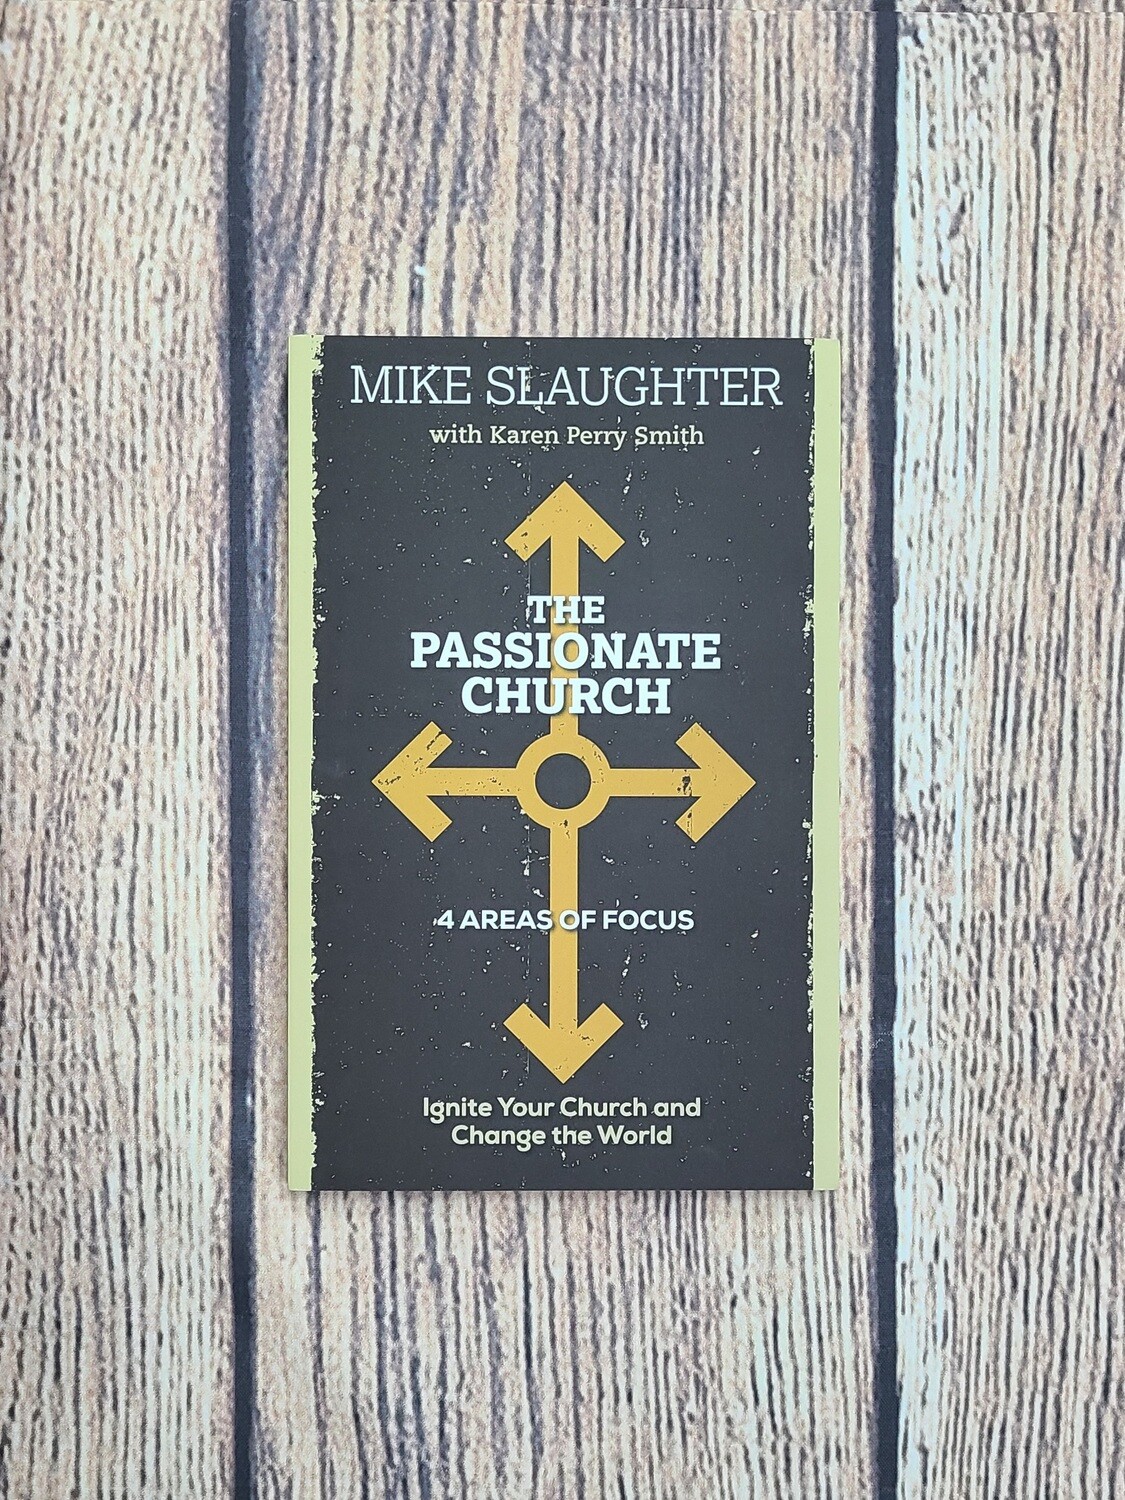 The Passionate Church: Ignite Your Church and Change the World by Mike Slaughter with Karen Perry Smith